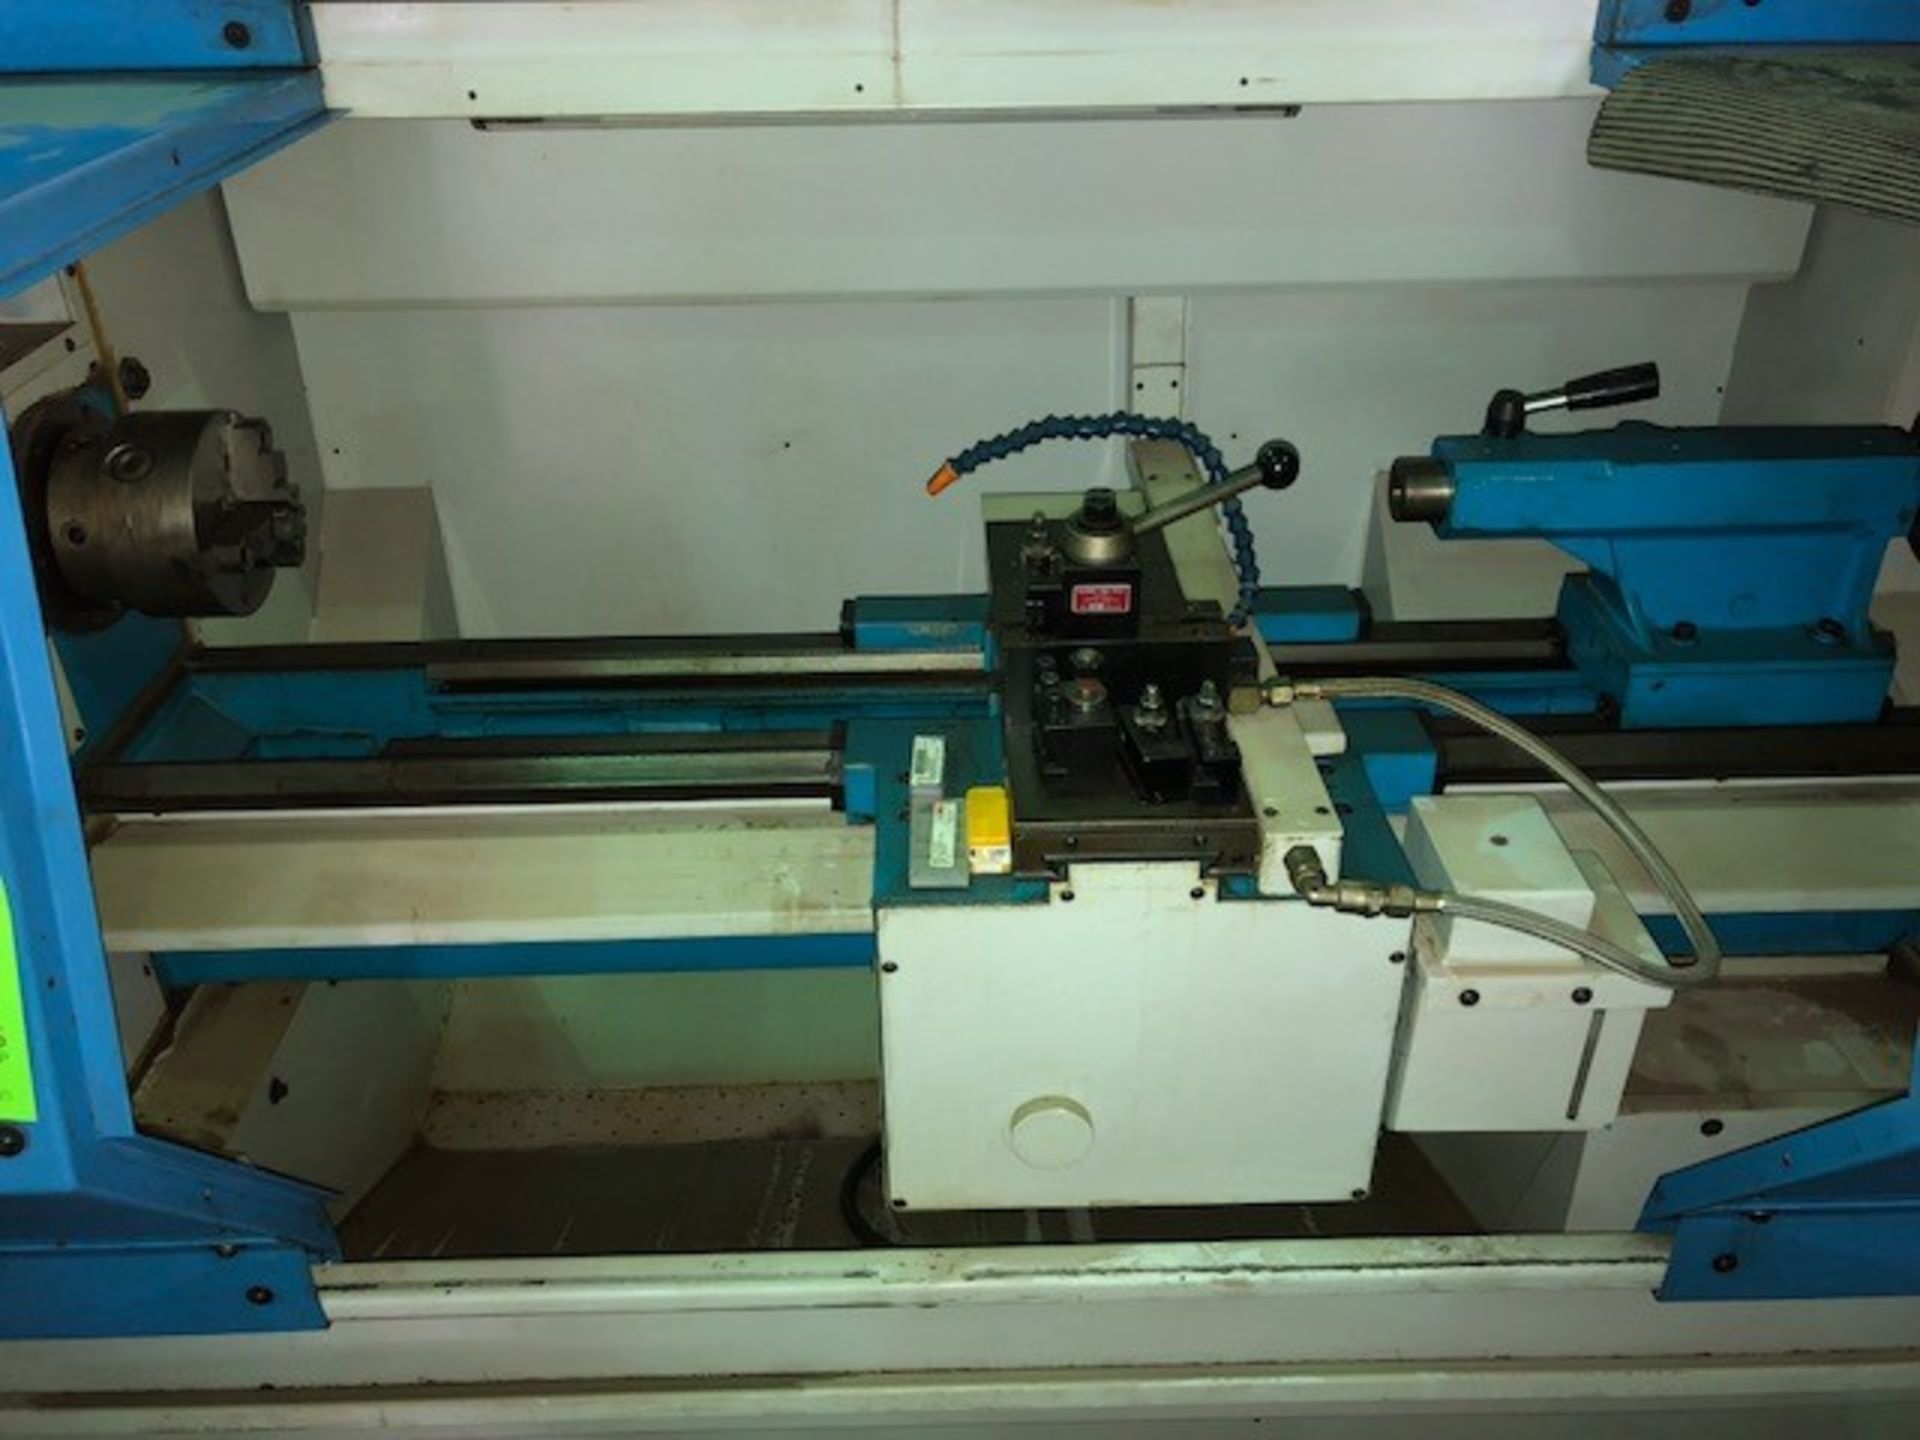 Clausing Metosa CNC Production Lathe, M/N CNC 1340, S/N 41633, Aprox. 60" L Working Area, with Fagor - Image 5 of 5